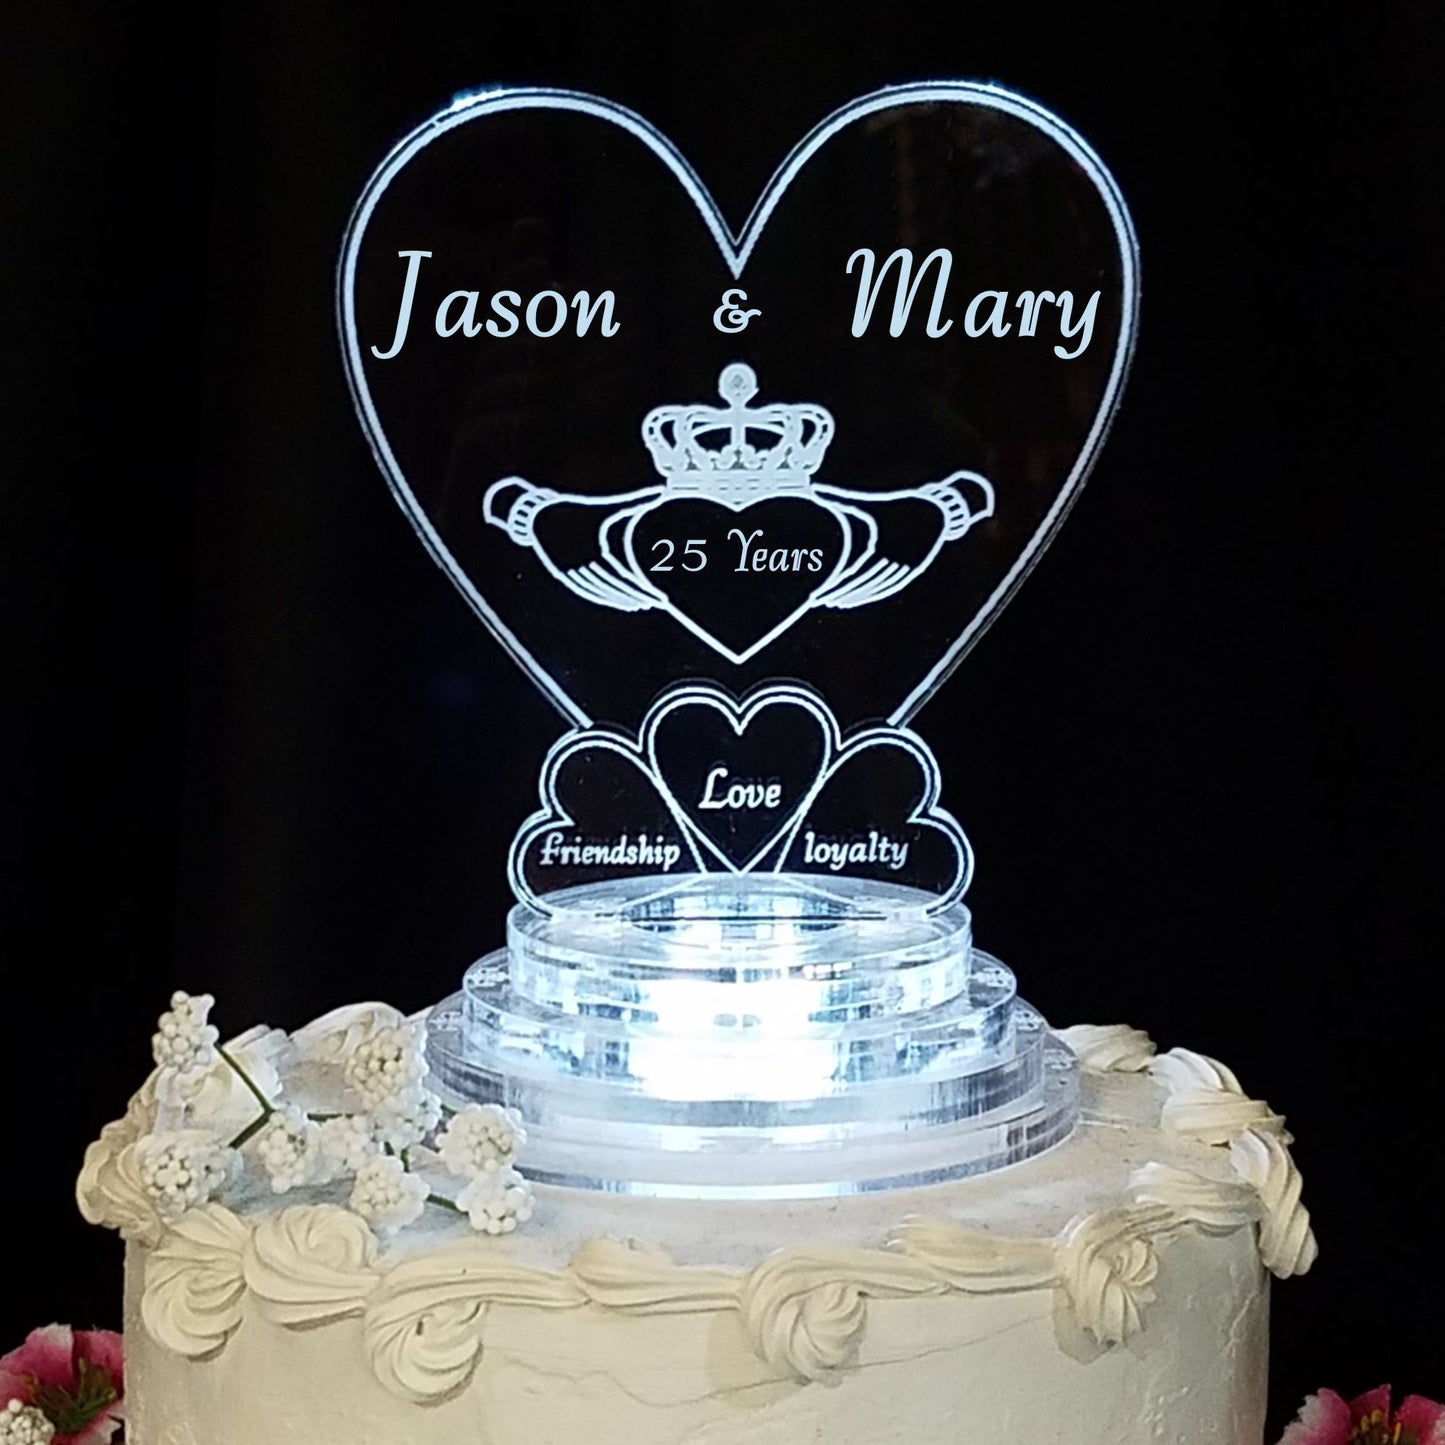 Heart shaped acrylic cake topper designed with a claddagh and engraved with names and number of years married for the anniversary